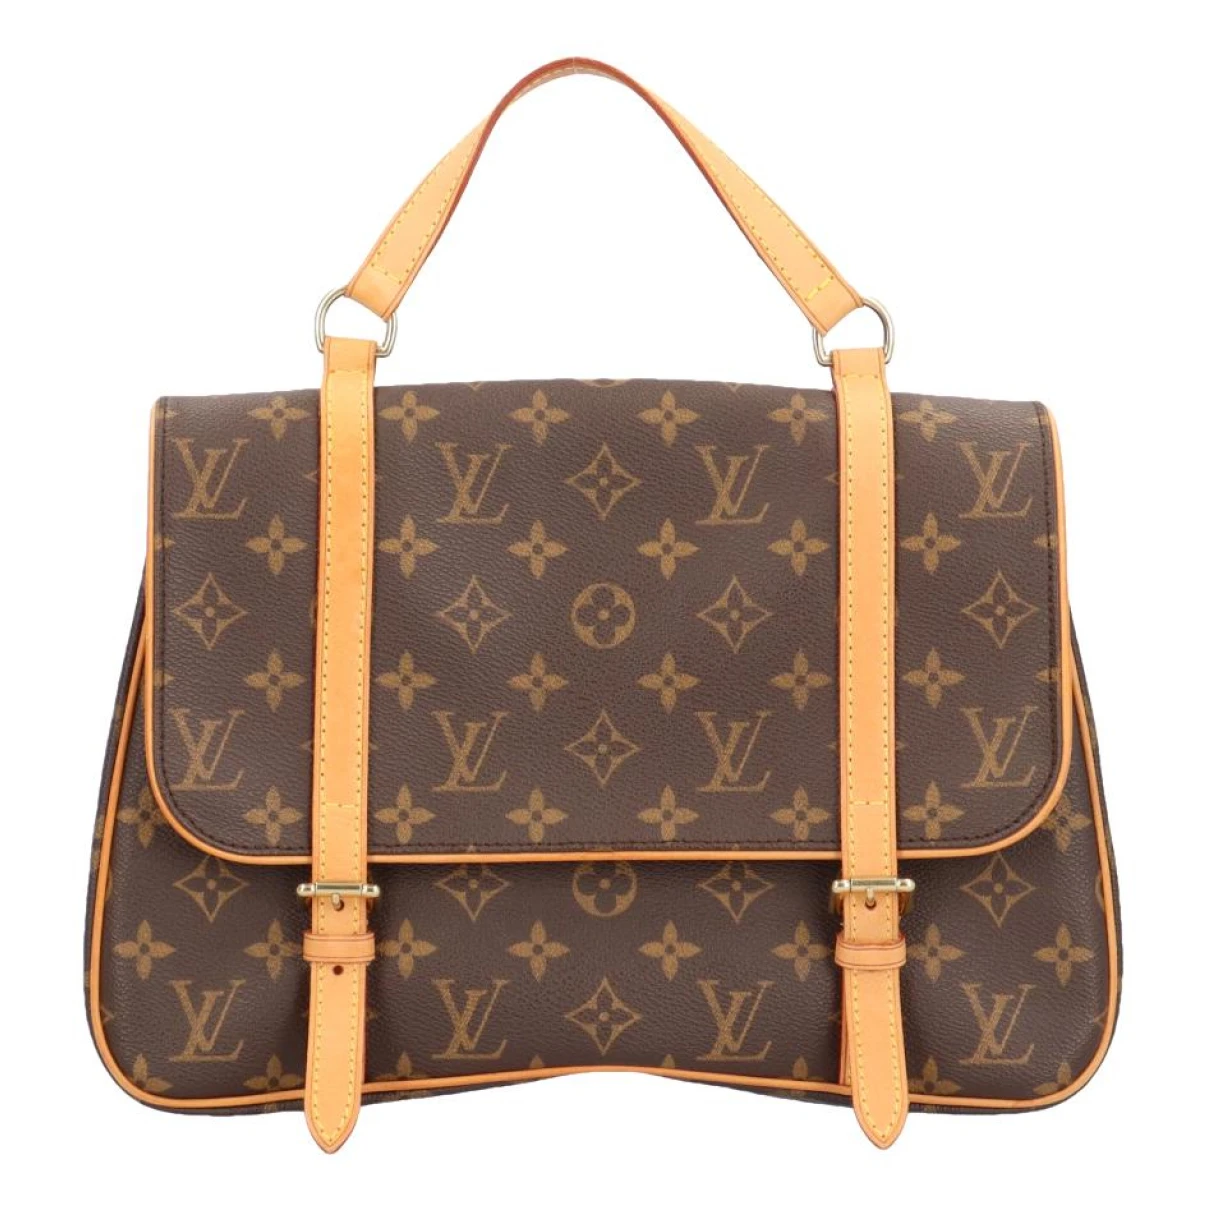 bags Louis Vuitton backpacks for Female Leather. Used condition